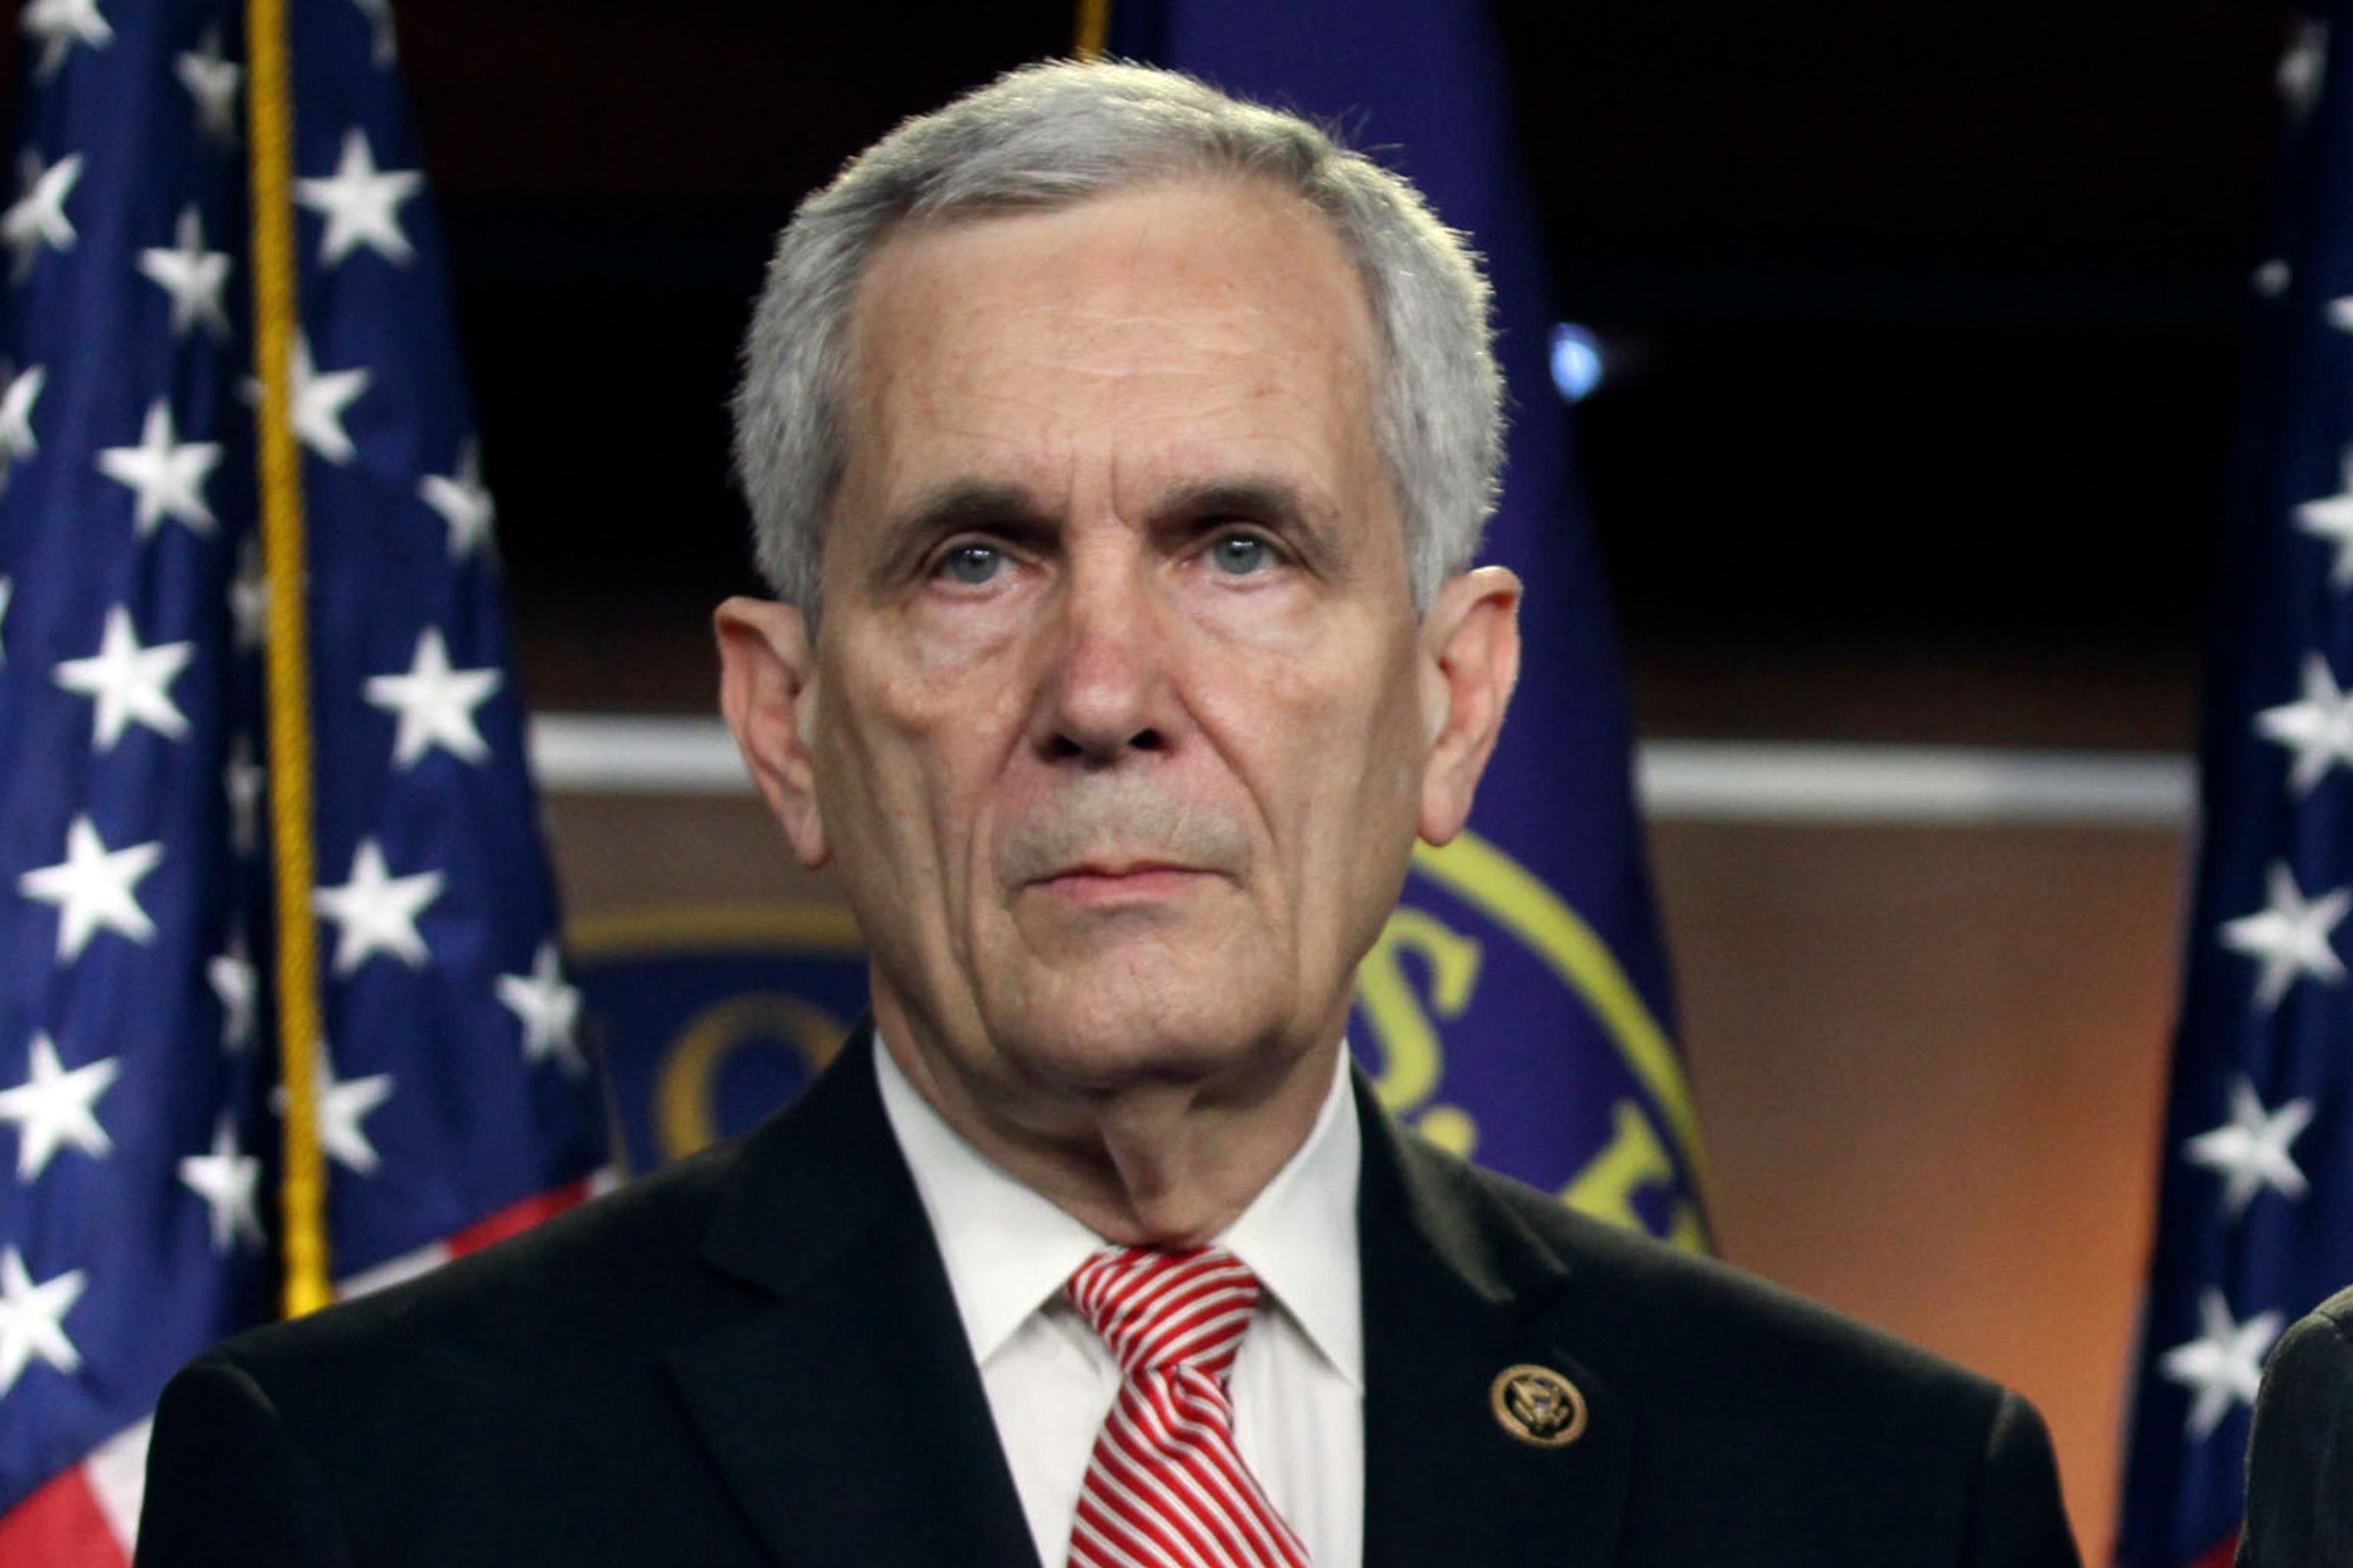 Rep. Lloyd Doggett becomes first Democrat in Congress to call for Biden's withdrawal from 2024 race